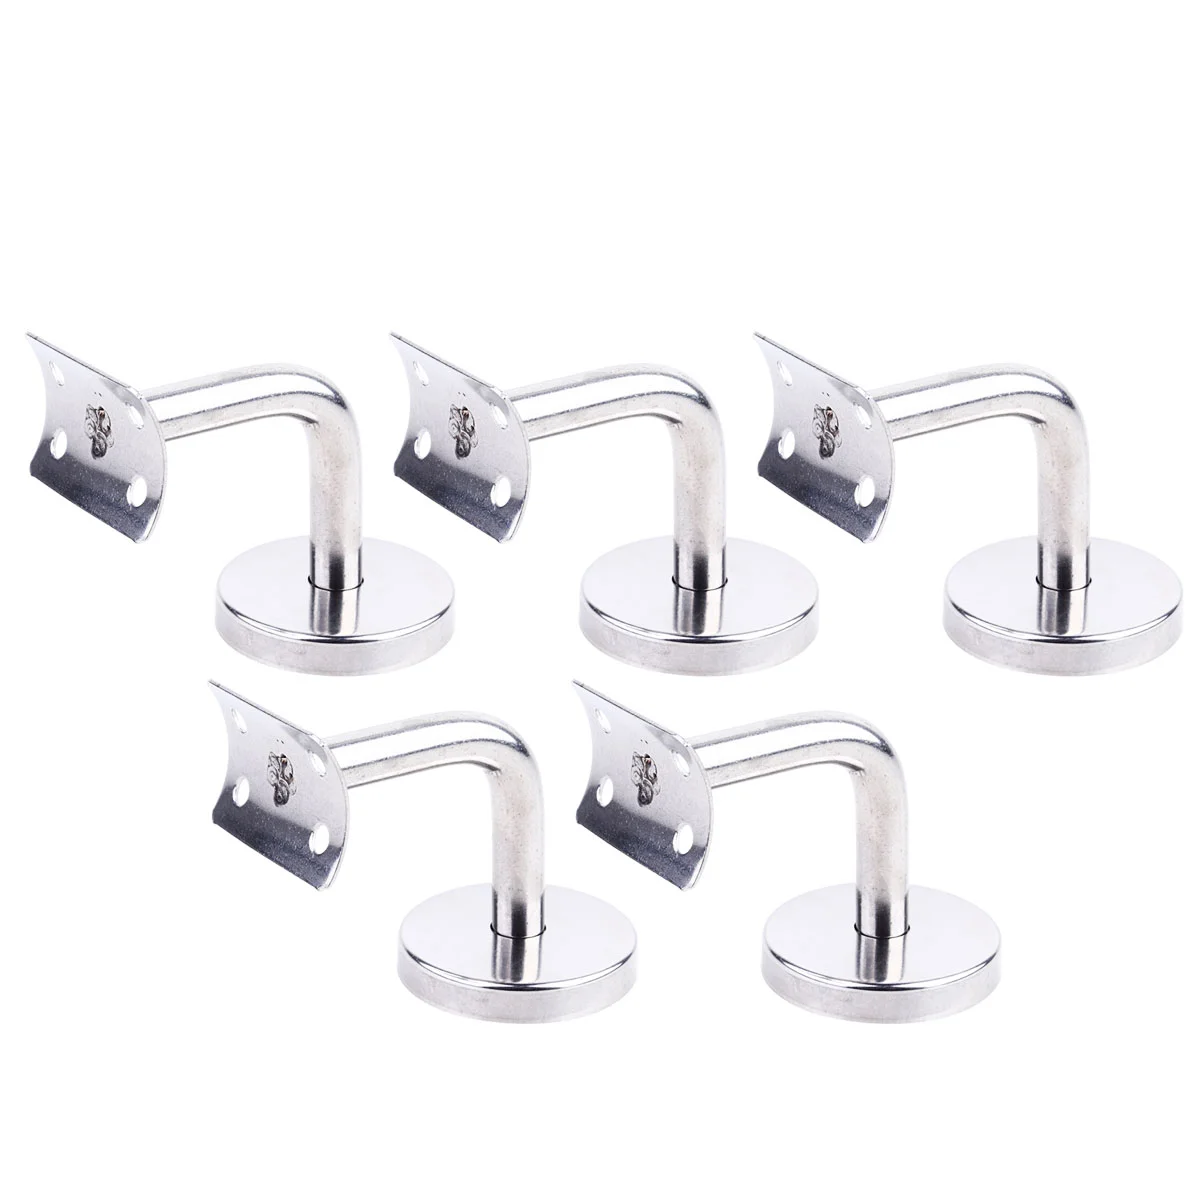 

5Pcs Stainless Steel Wall Holder Handrail Wall Mounted Brackets Supports (without Screw)